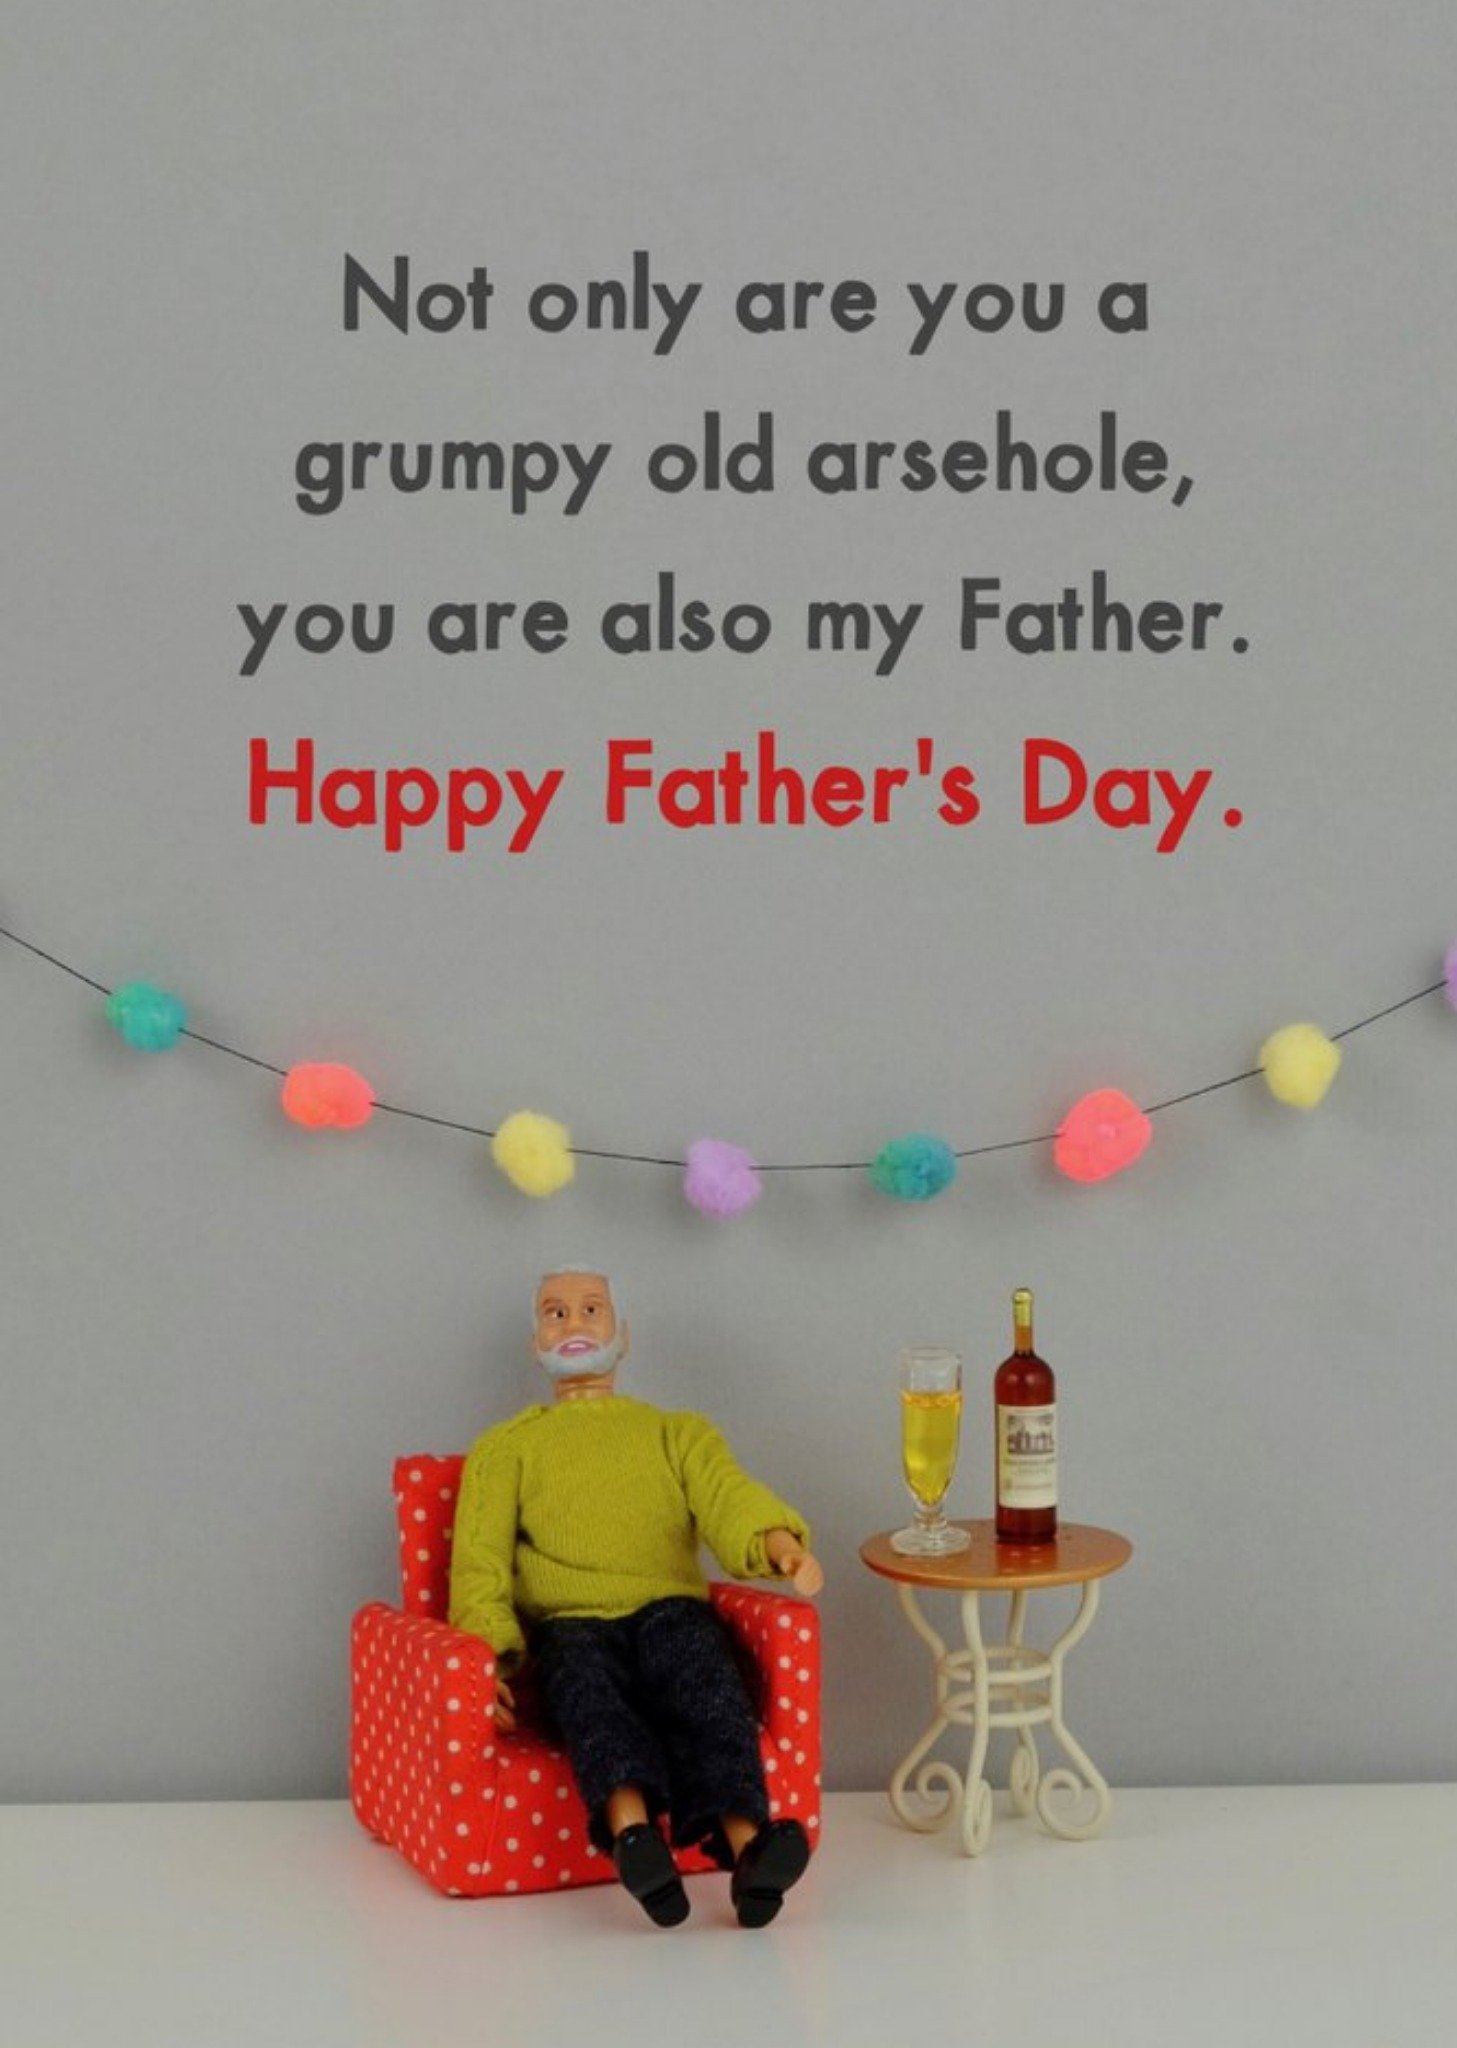 Bold And Bright Funny Rude Not Only Are You A Grumpy Old Ahole You Are Also My Father Happy Fathers 